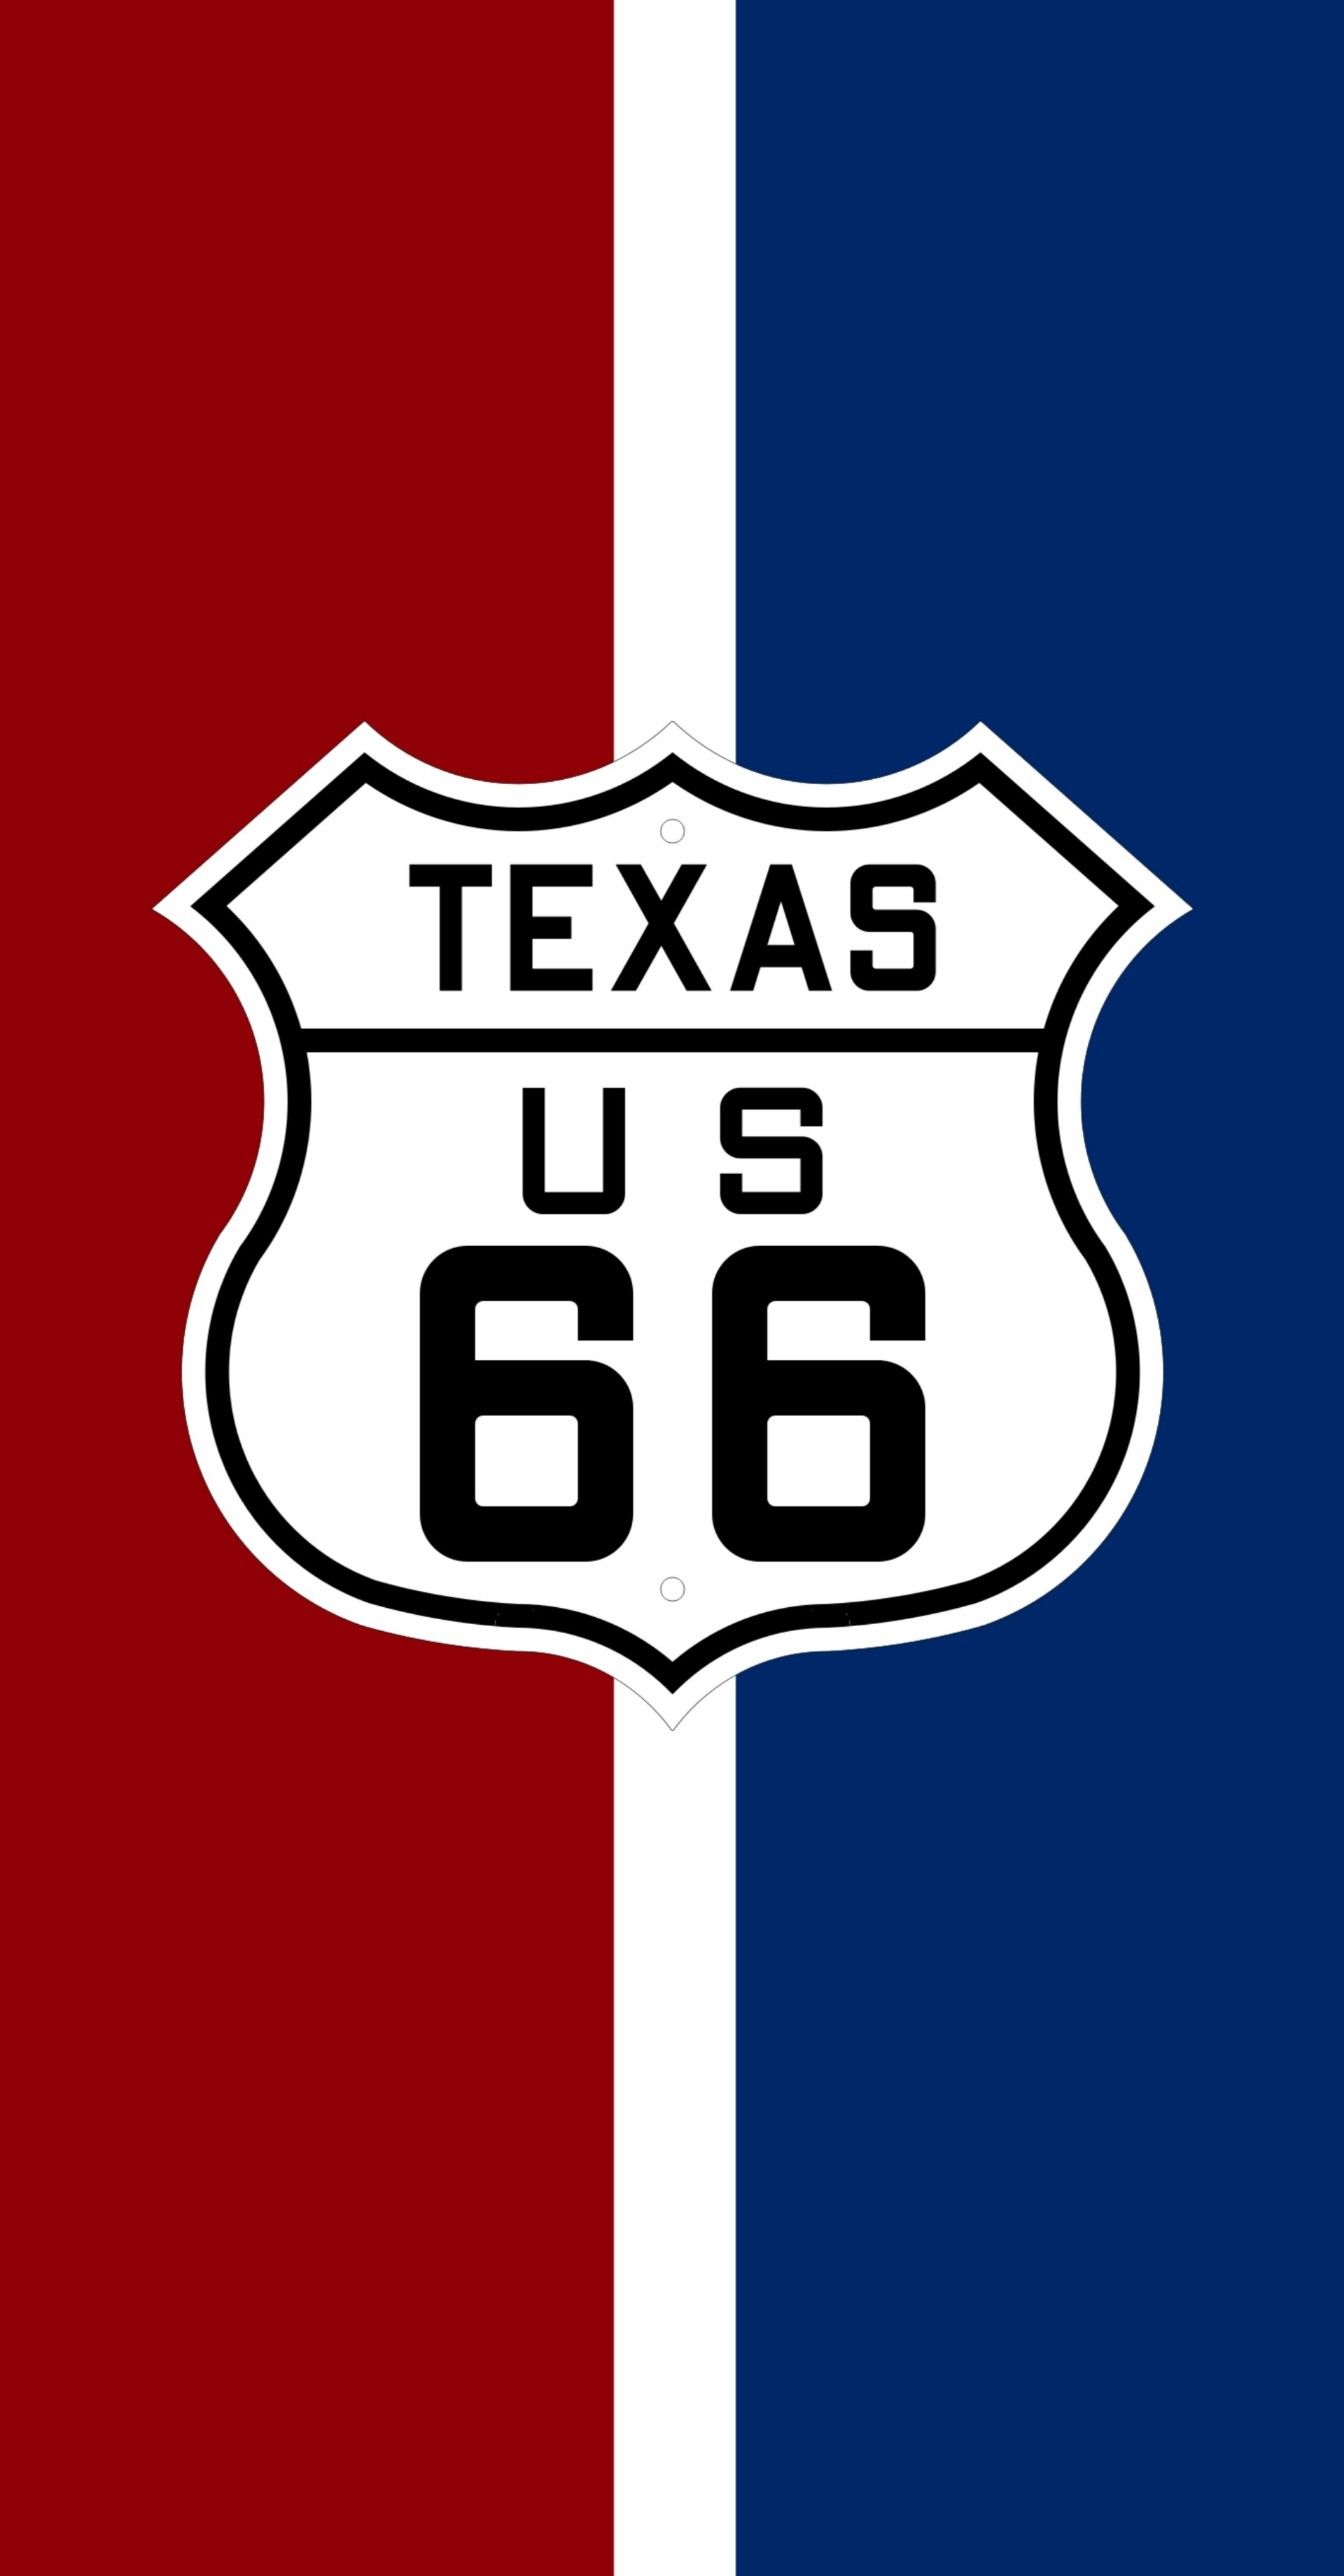 Route 66 Texas sign on a red, white and blue background - Texas